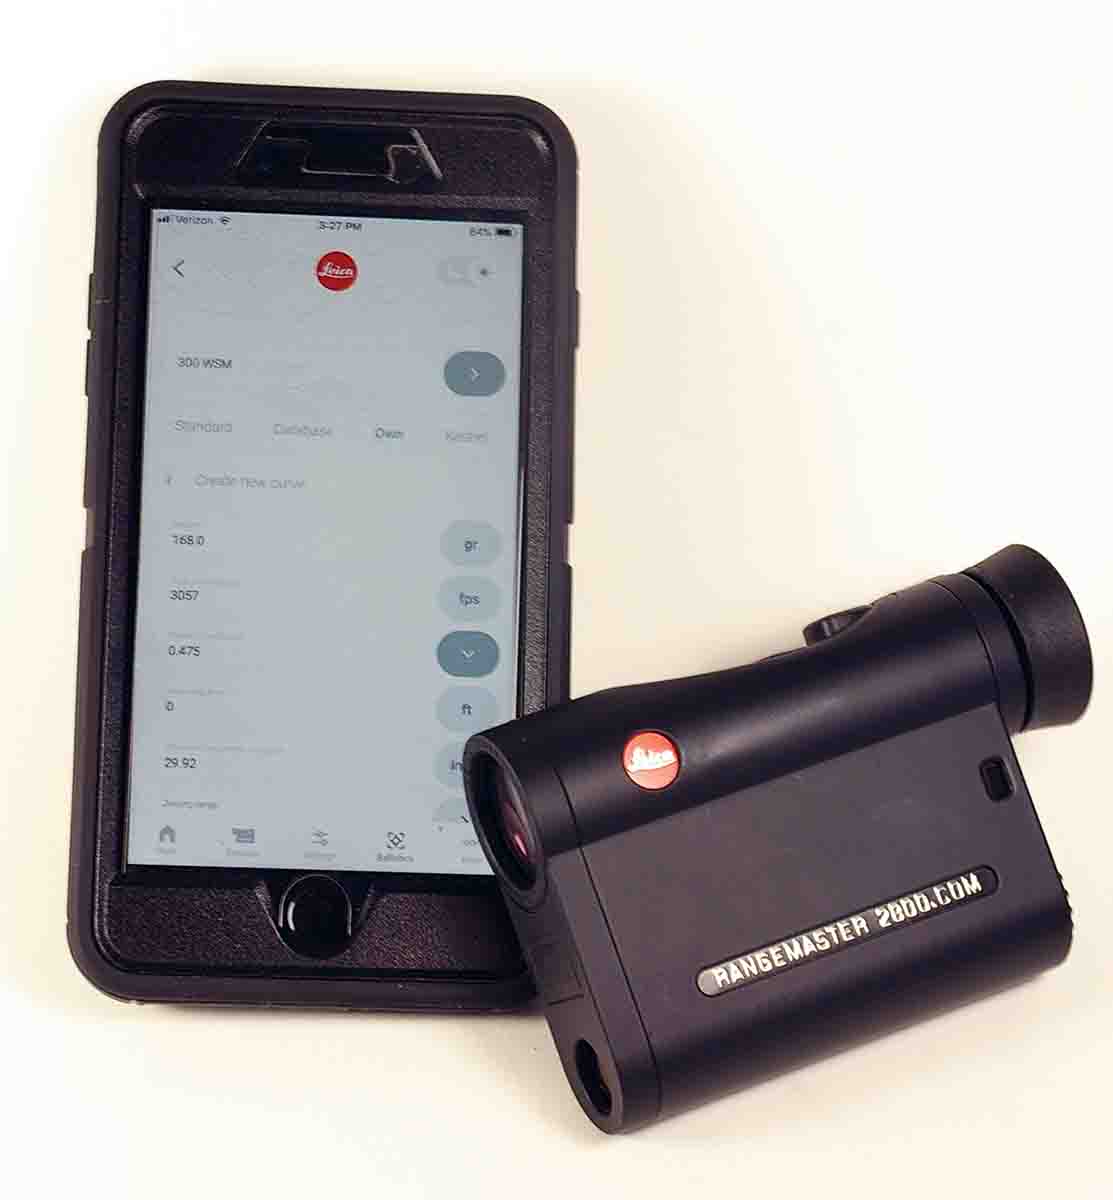 Ballistic information can be entered directly into the new rangefinder, or into the Leica Hunting app on a smartphone then transferred to the Rangemaster.